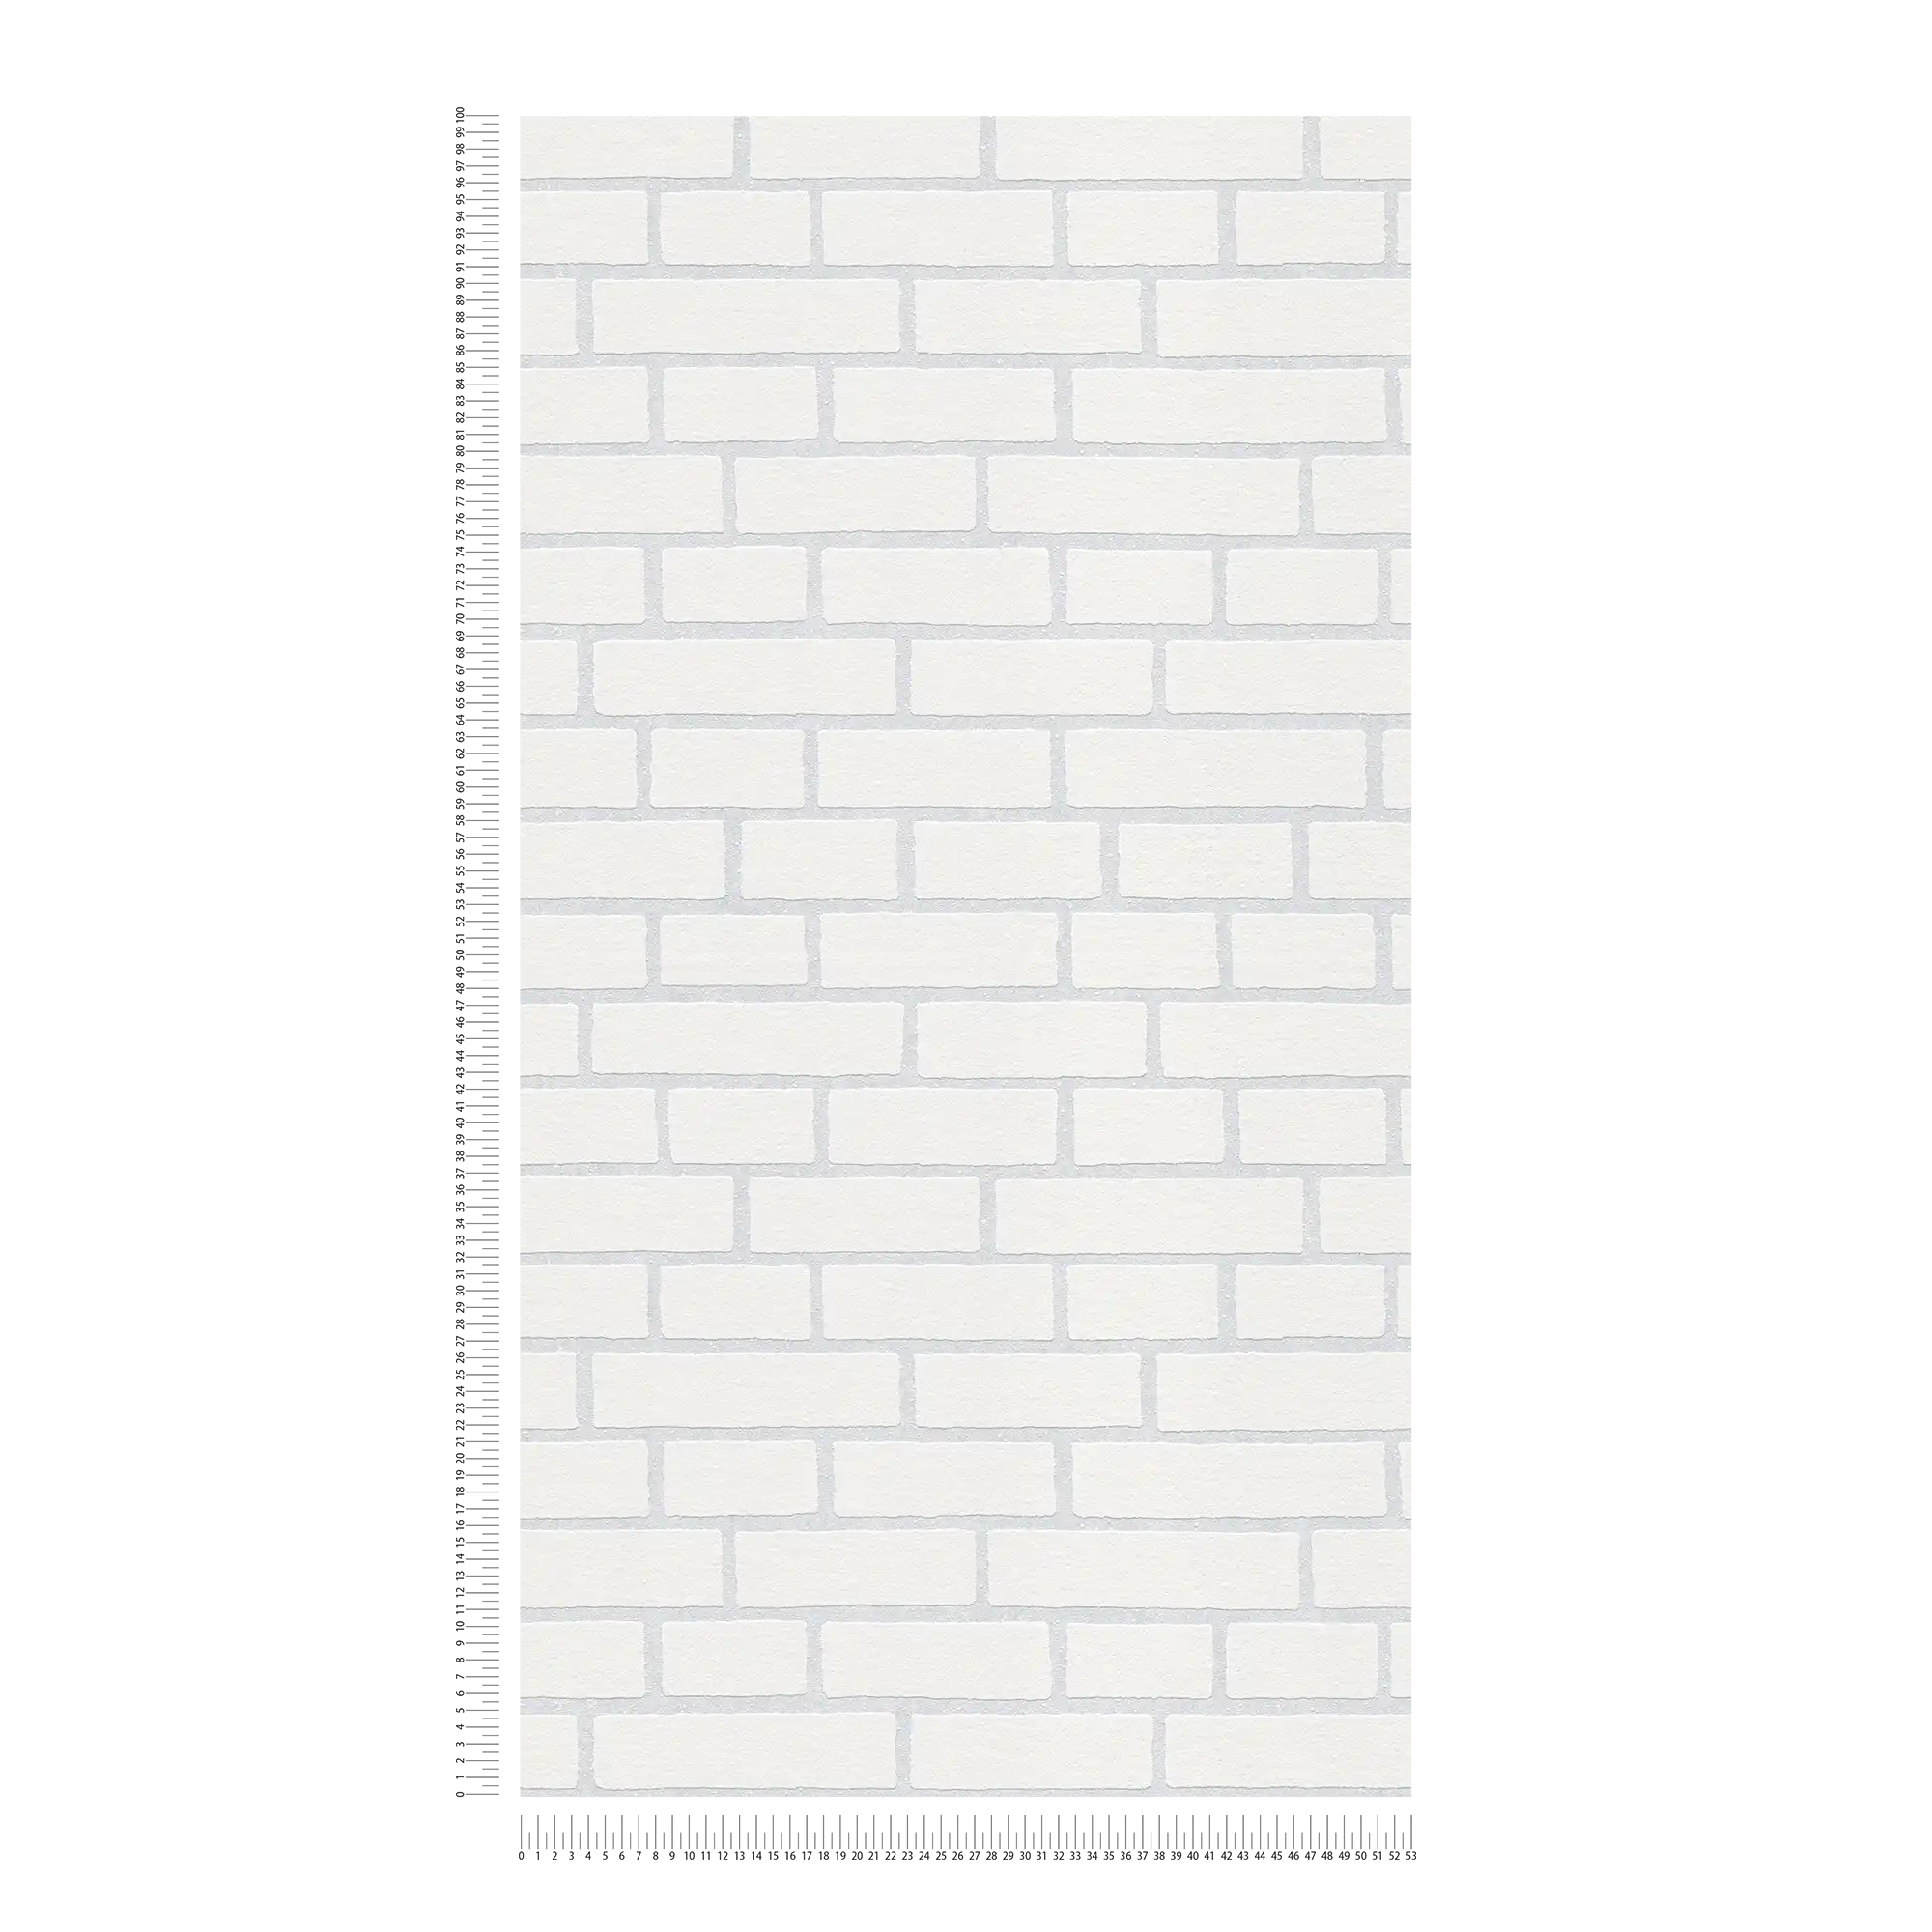             Masonry wallpaper to paint over, with 3D effect - Paintable, White
        